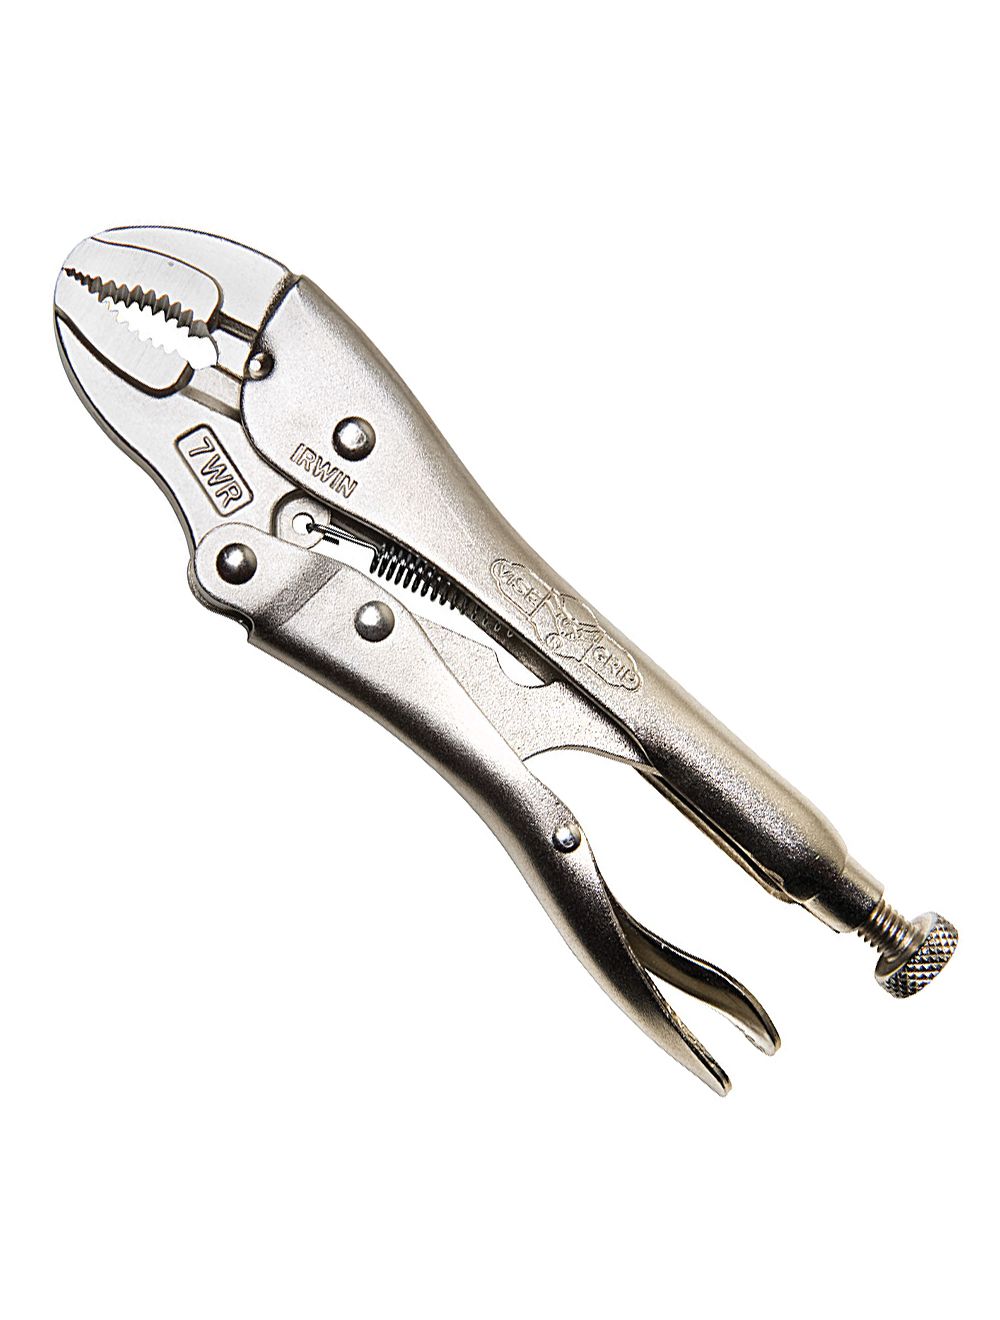 Pliers, 7 in locking curved jaw with